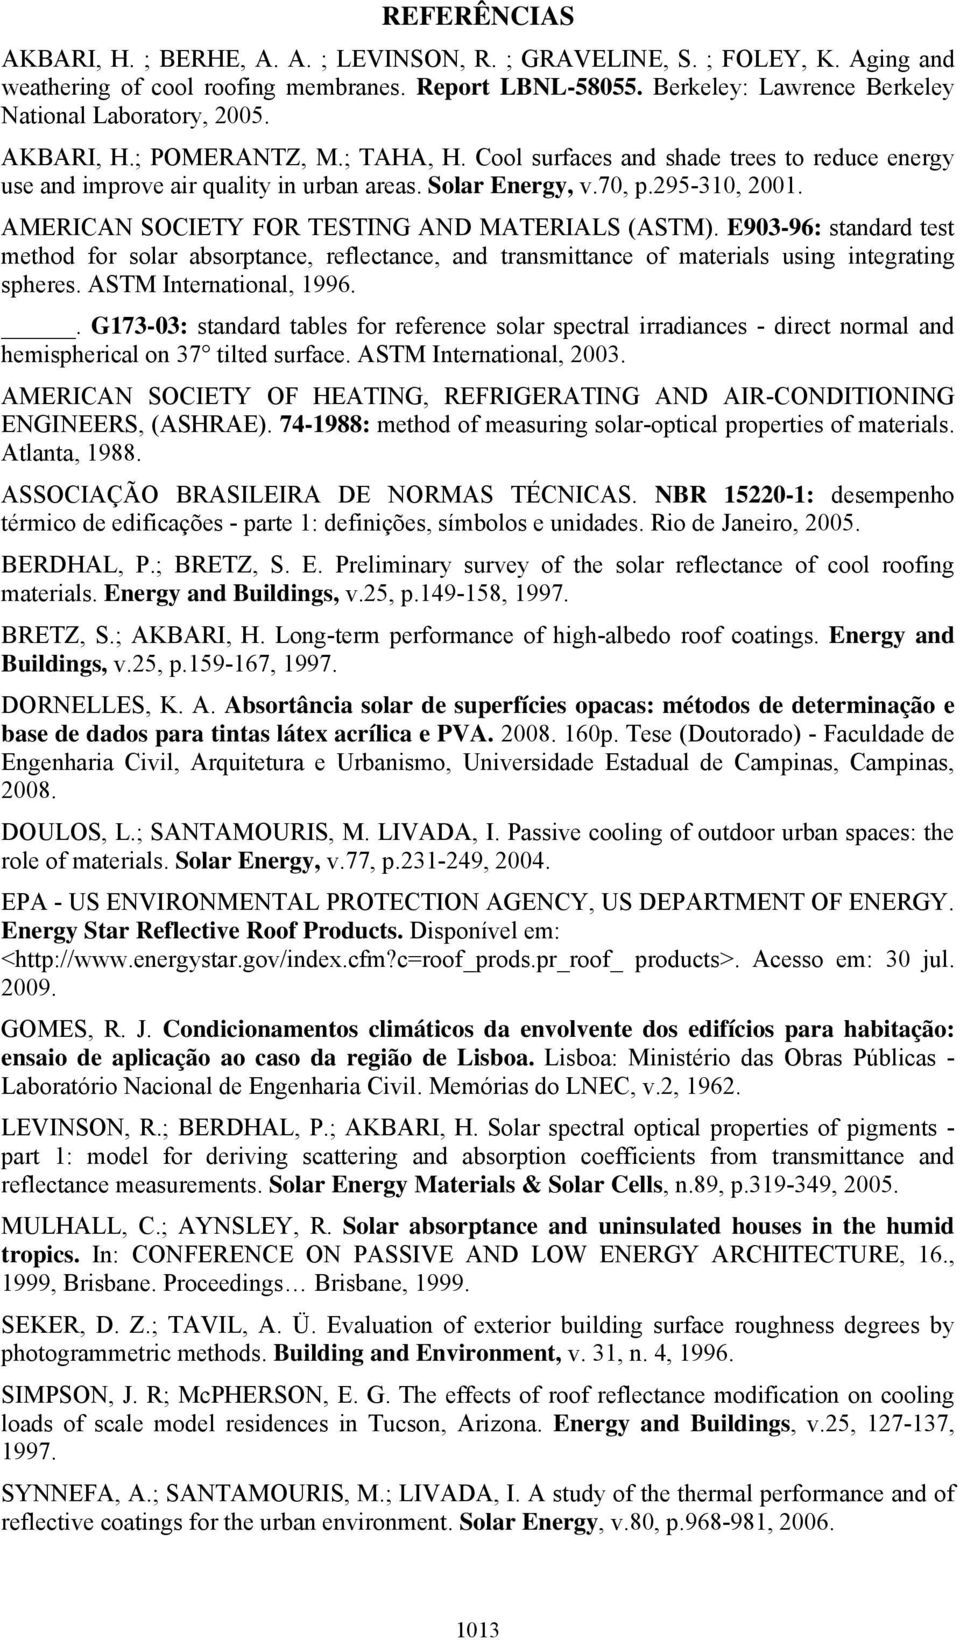 70, p.295-310, 2001. AMERICAN SOCIETY FOR TESTING AND MATERIALS (ASTM). E903-96: standard test method for solar absorptance, reflectance, and transmittance of materials using integrating spheres.